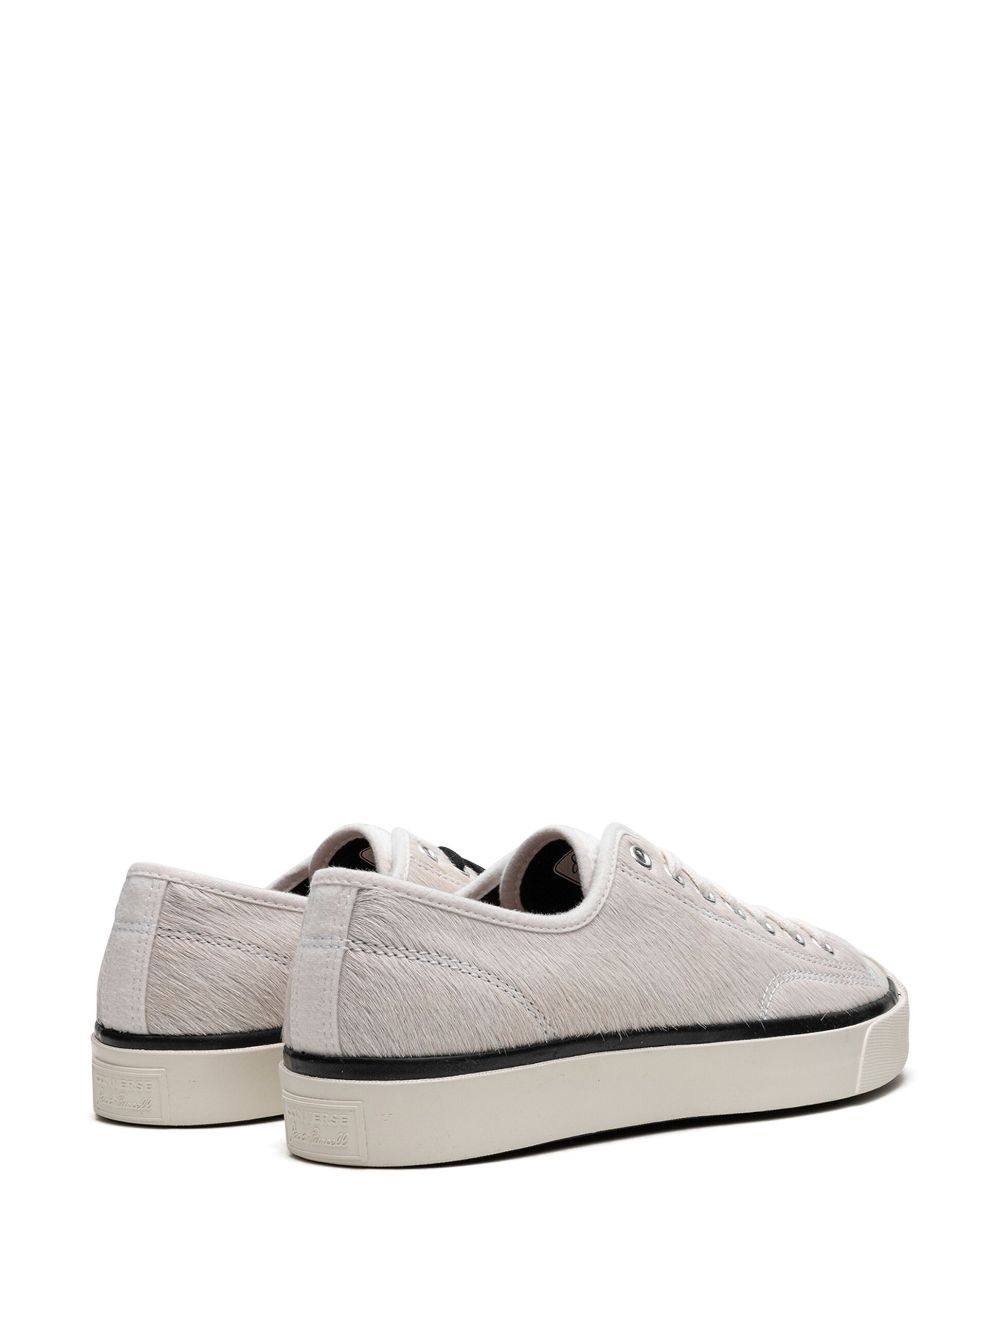 x CLOT Jack Purcell Low sneakers - 3